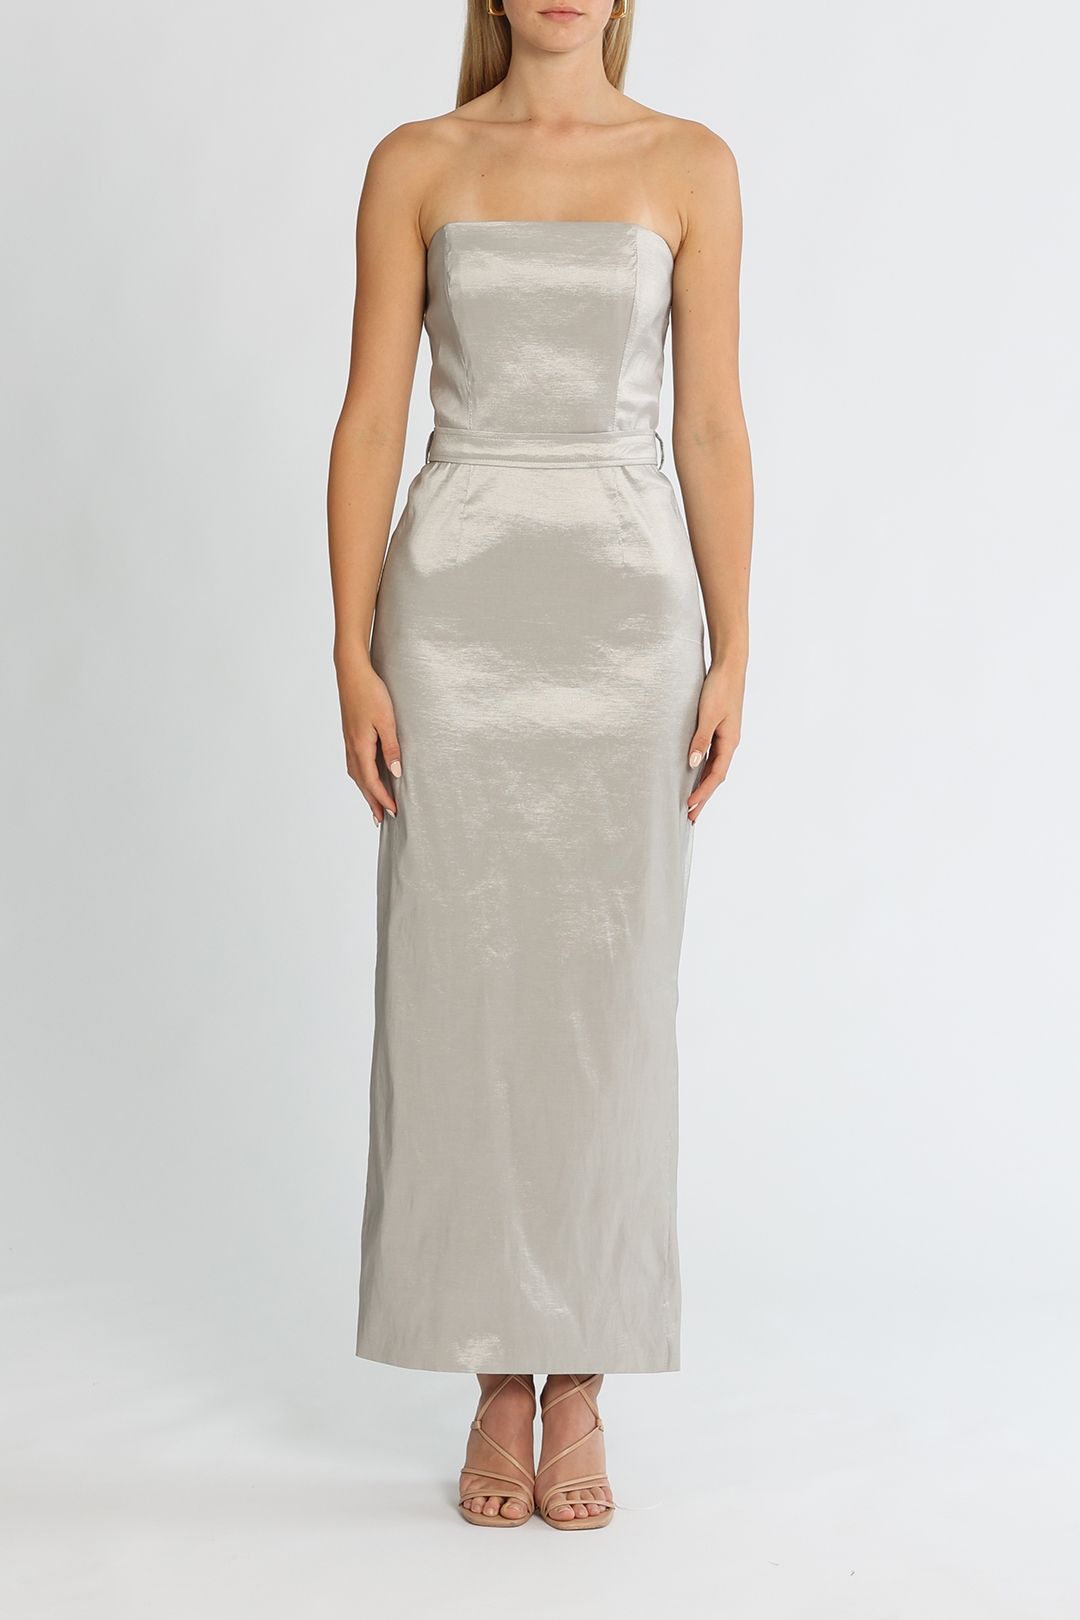 Elle Zeitoune Fitted Strapless Dress Silver